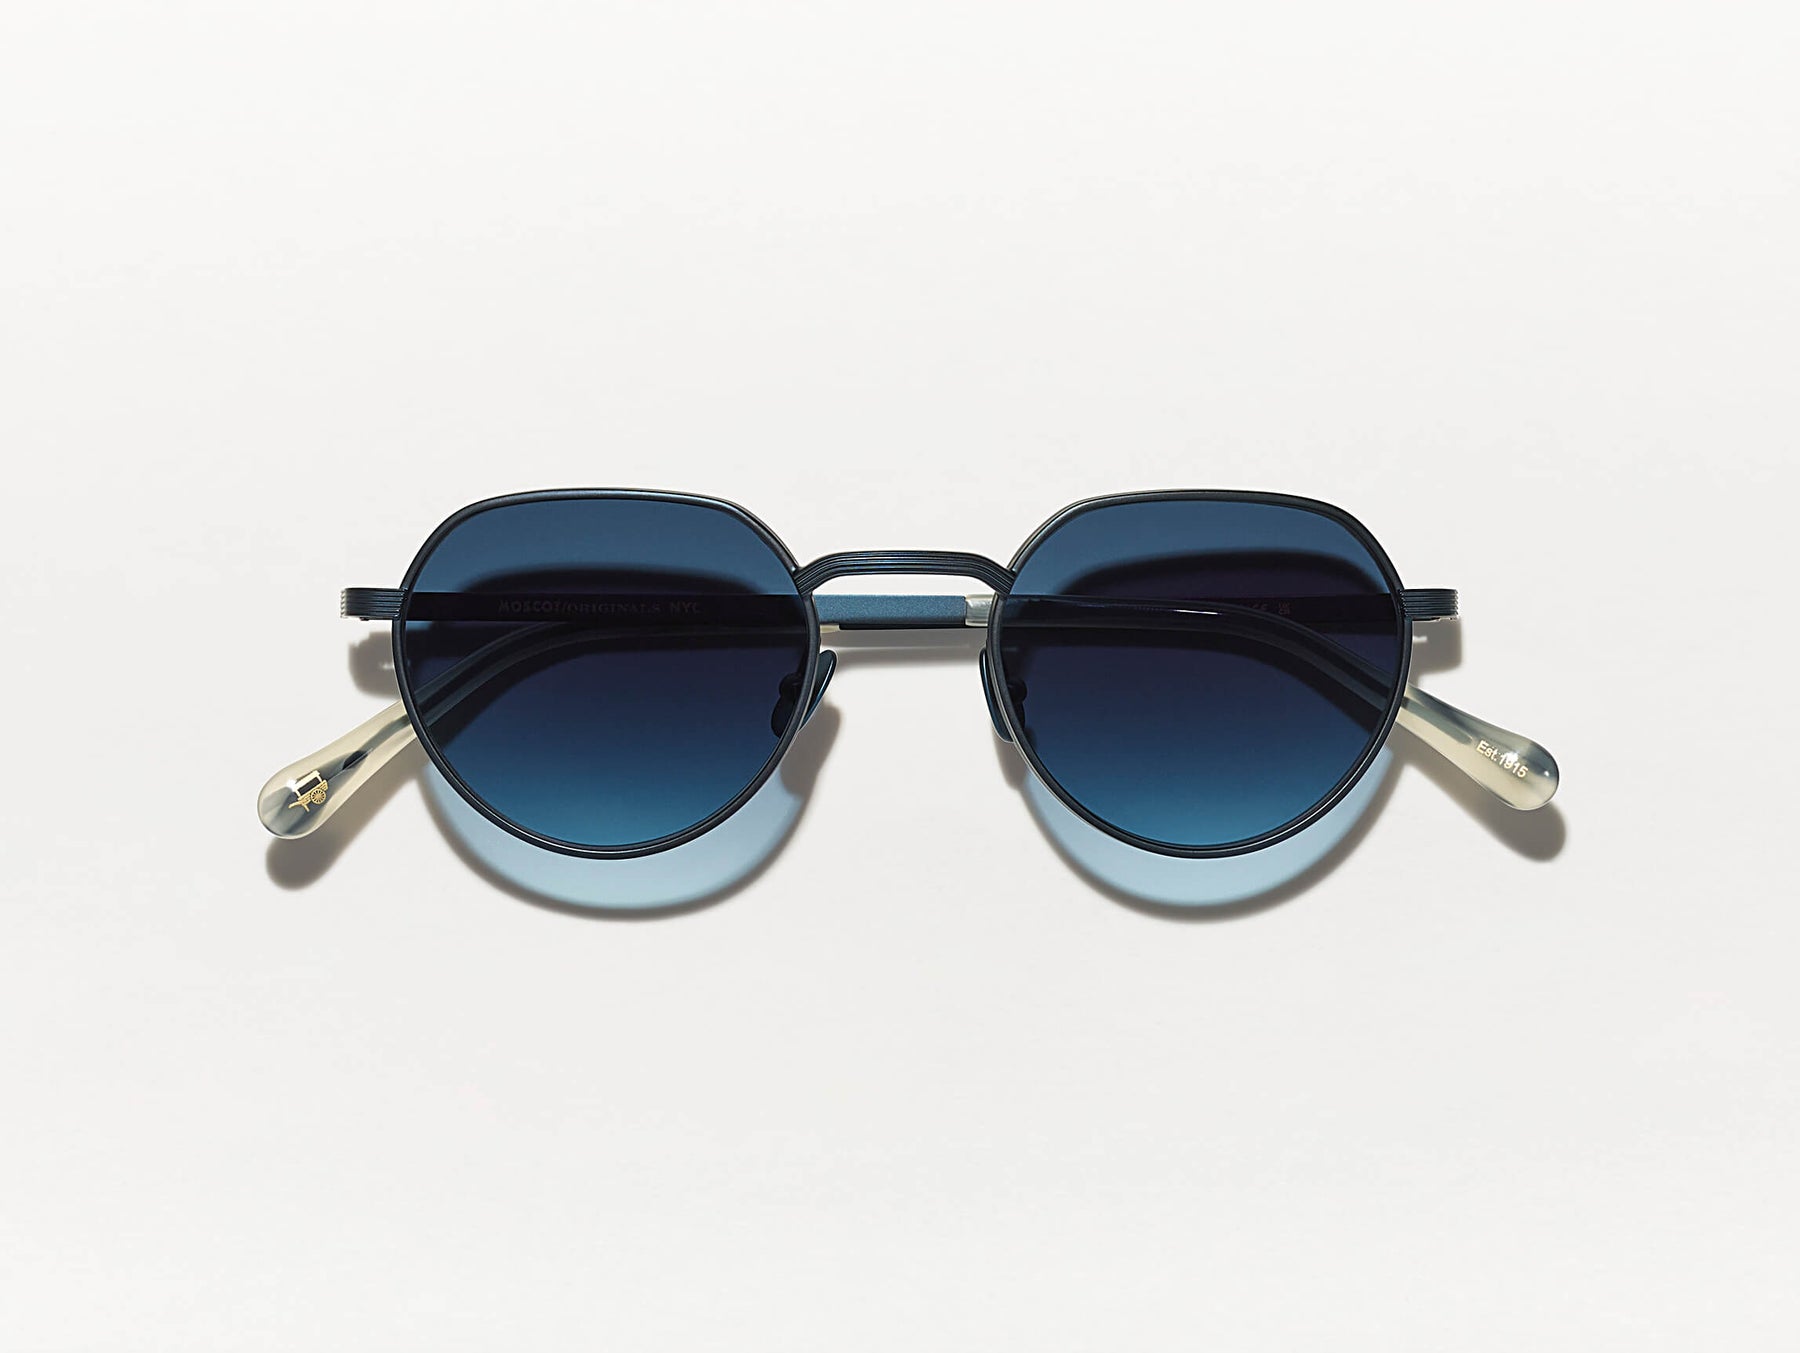 The SMENDRINK SUN in Navy with Denim Blue Tinted Lenses